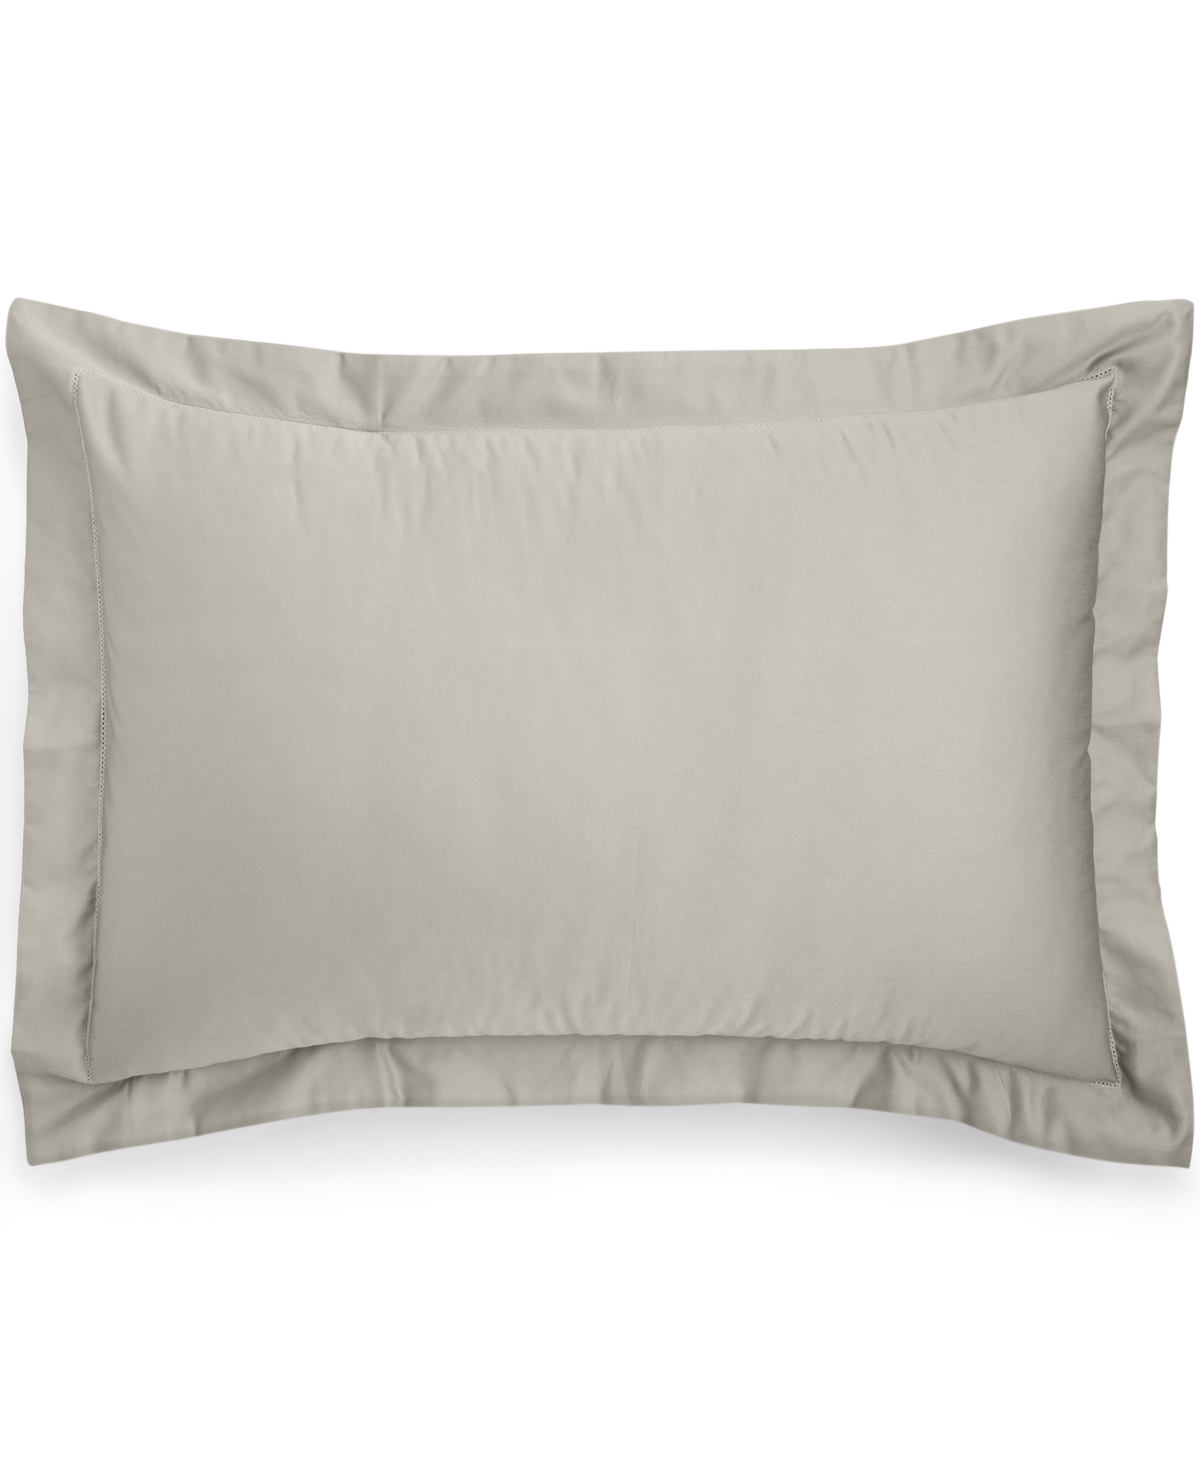 Damask 550 Thread Count 100% Cotton Sham, Standard, Created for Macy's - Parchment